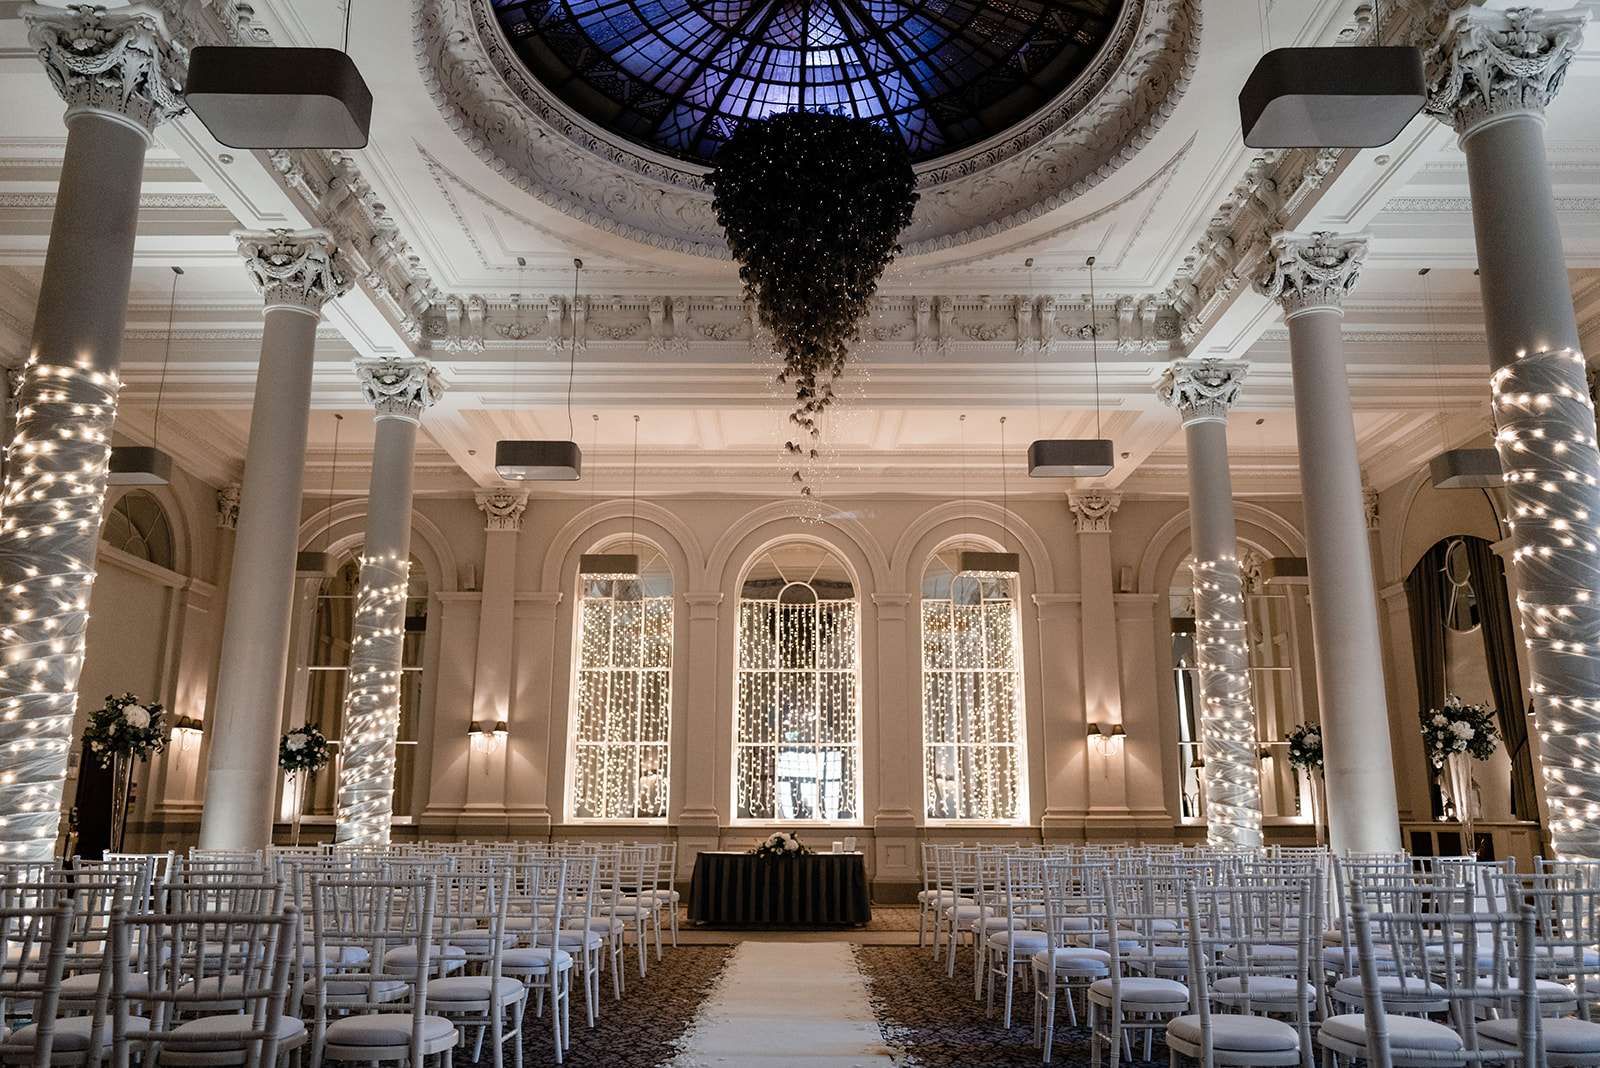 the George hotel Edinburgh, King's Hall decorated for a beautiful wedding ceremony.